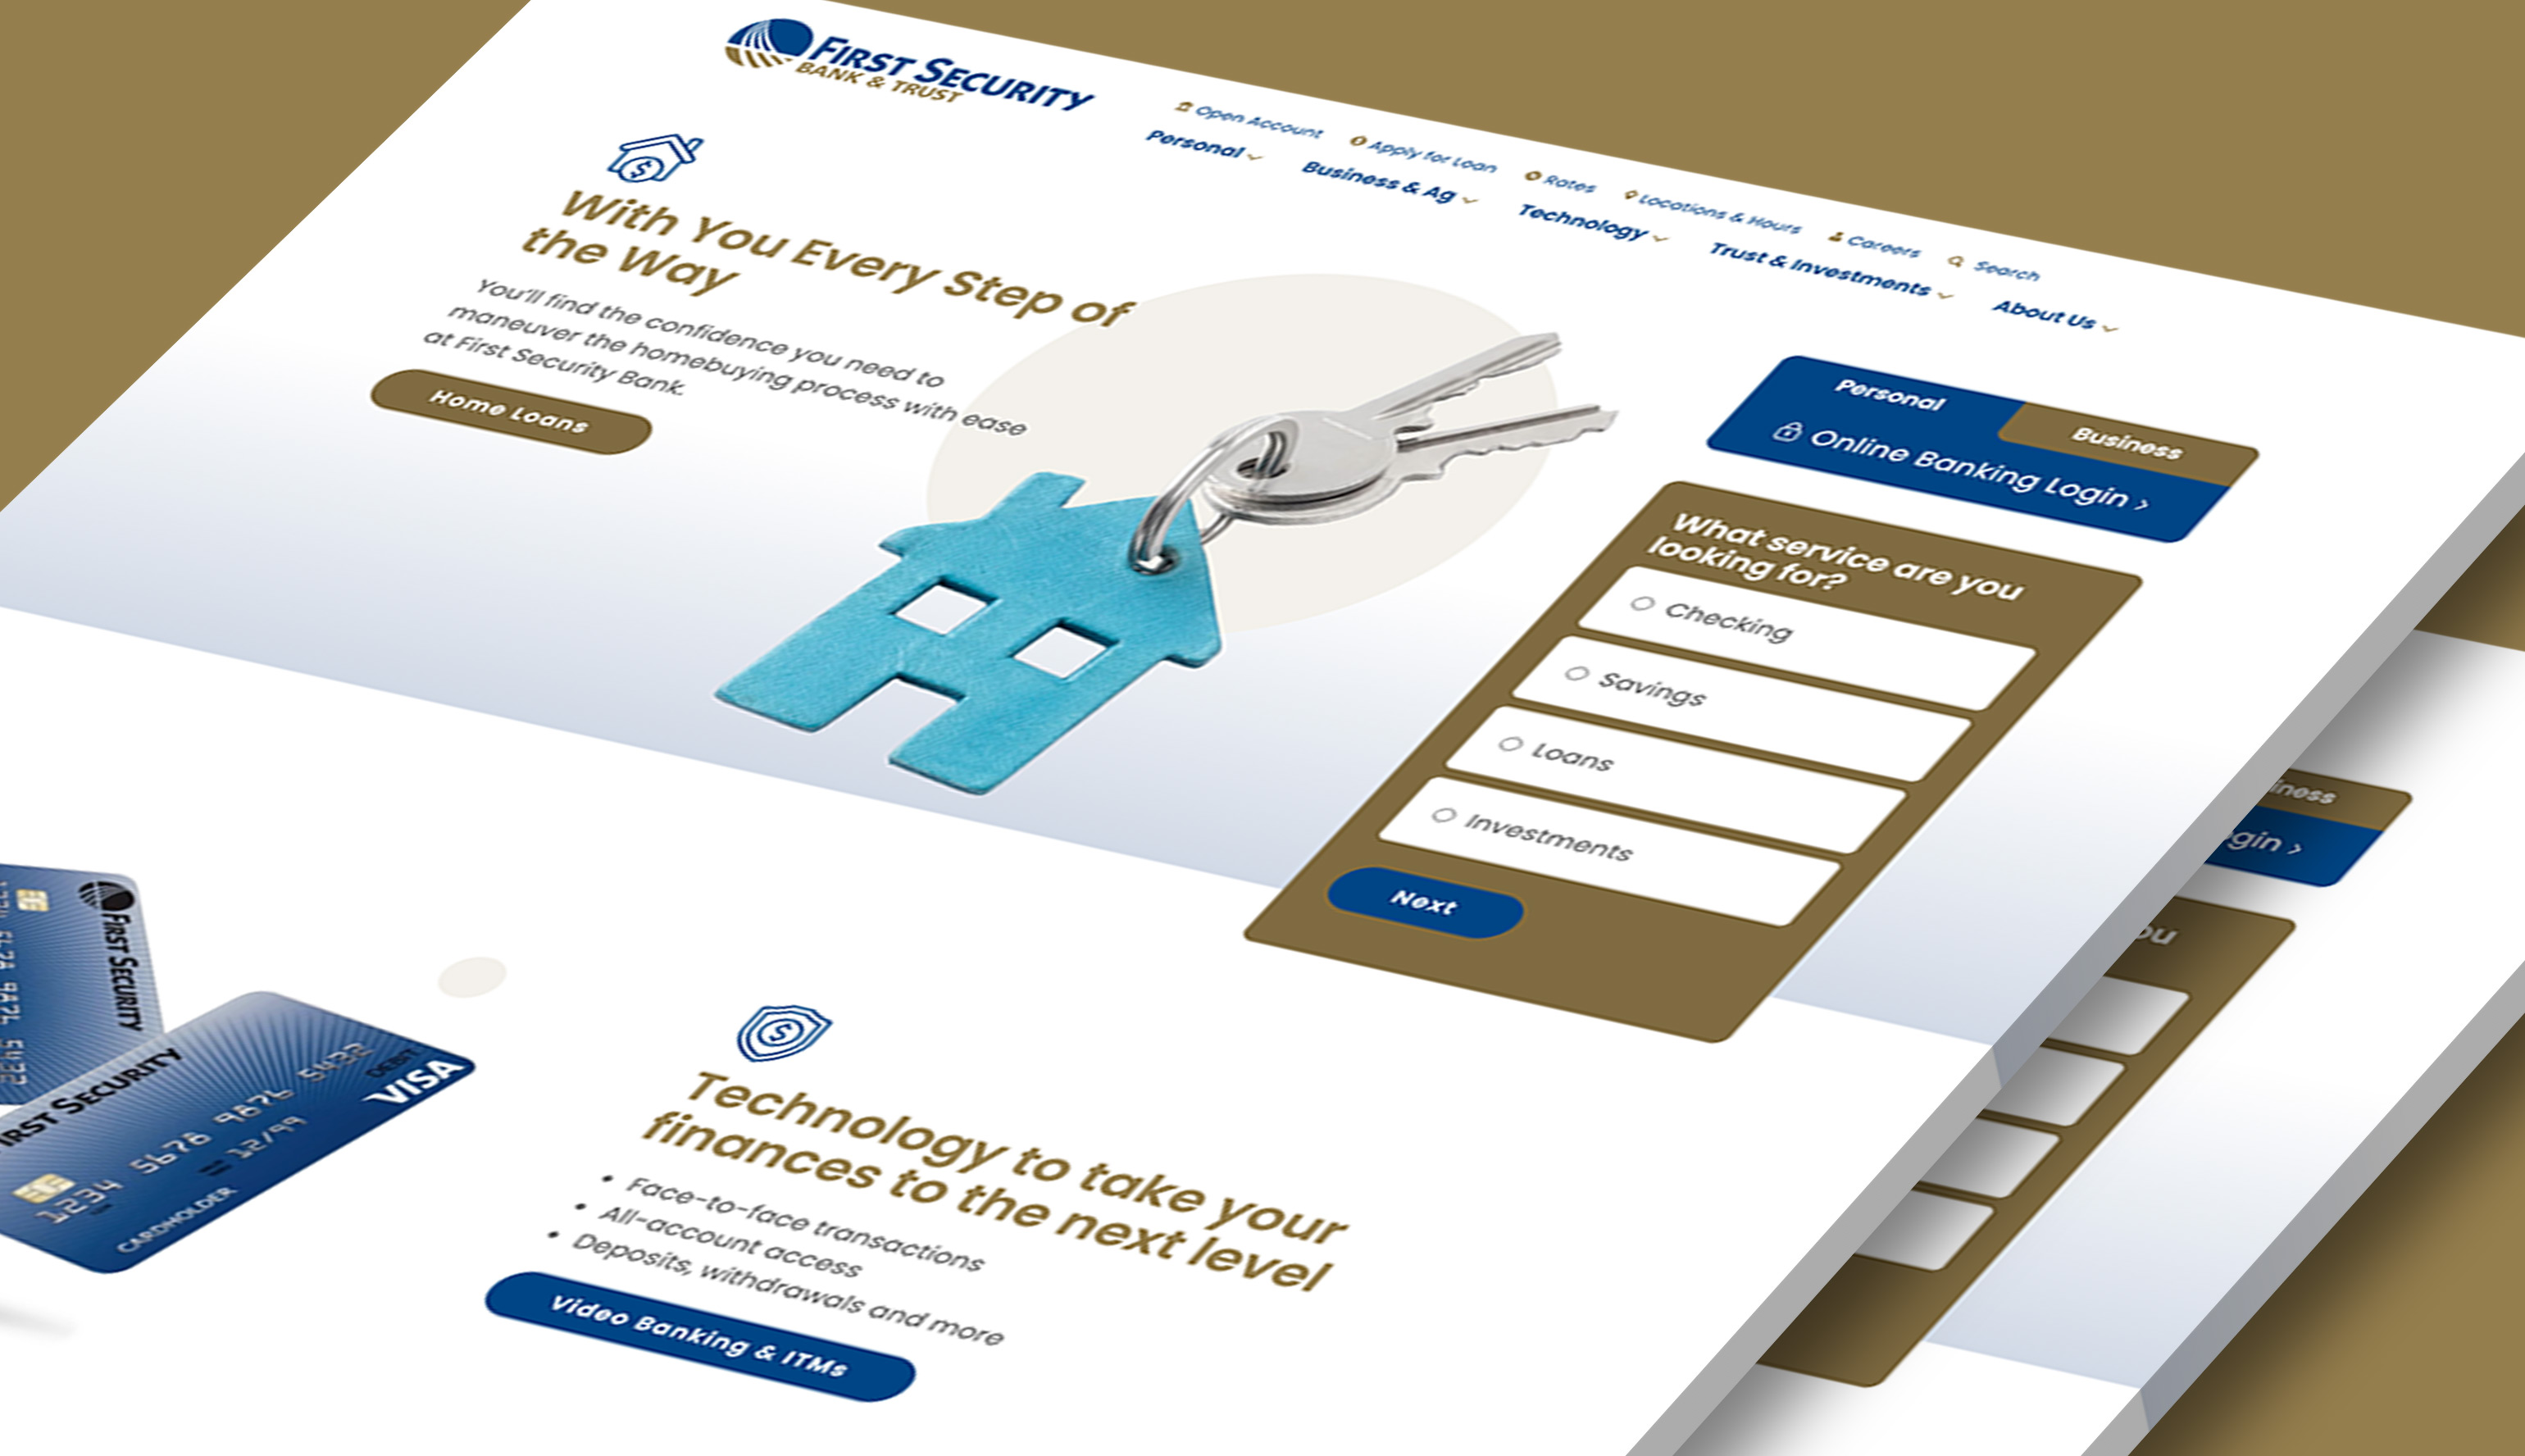 The service wizard from Security First Bank & Trust’s website